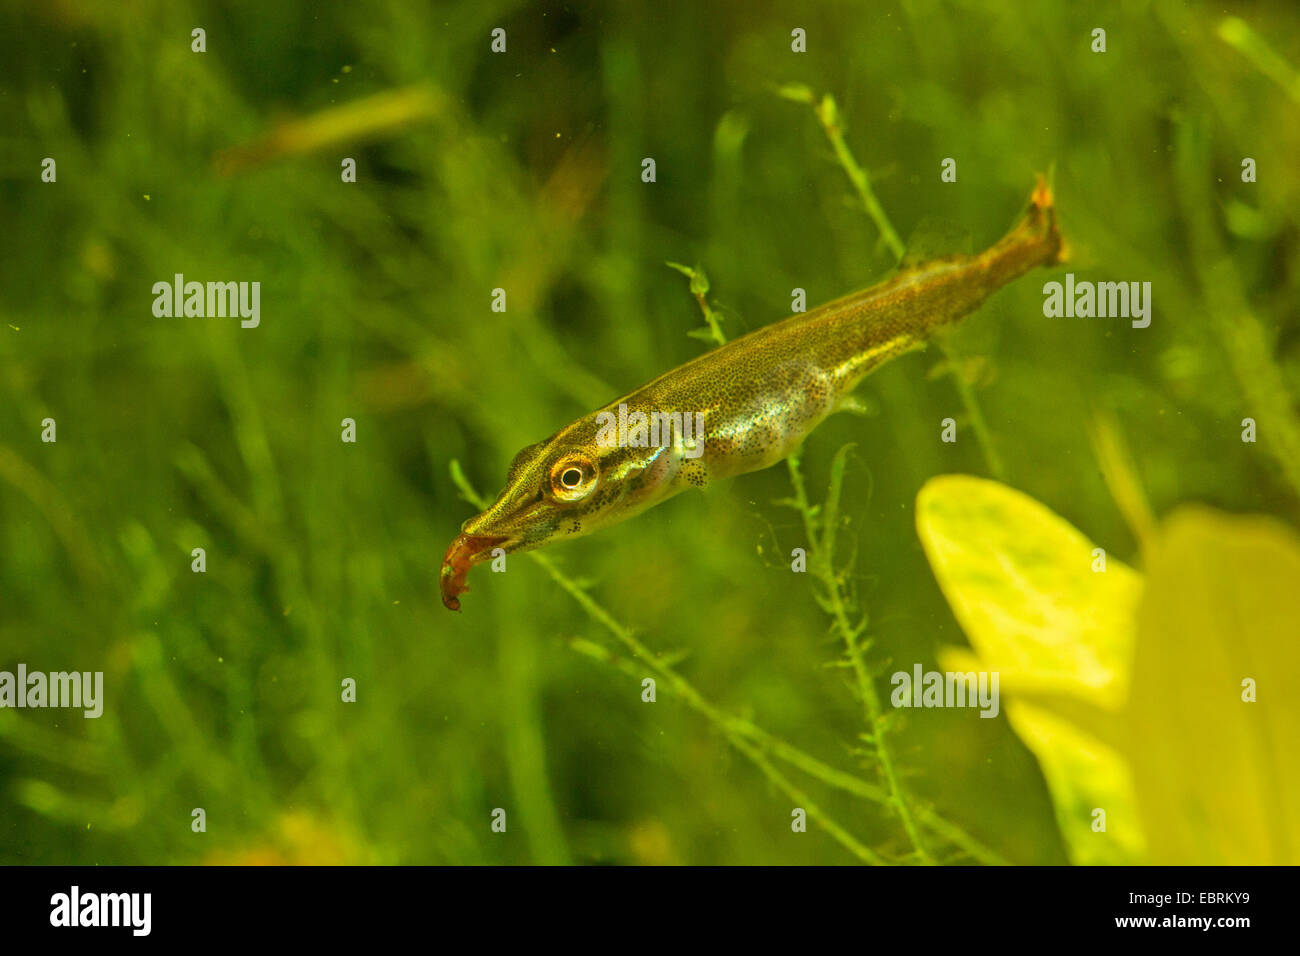 pike, northern pike (Esox lucius), juvenile eating a mosquito larva, Germany Stock Photo